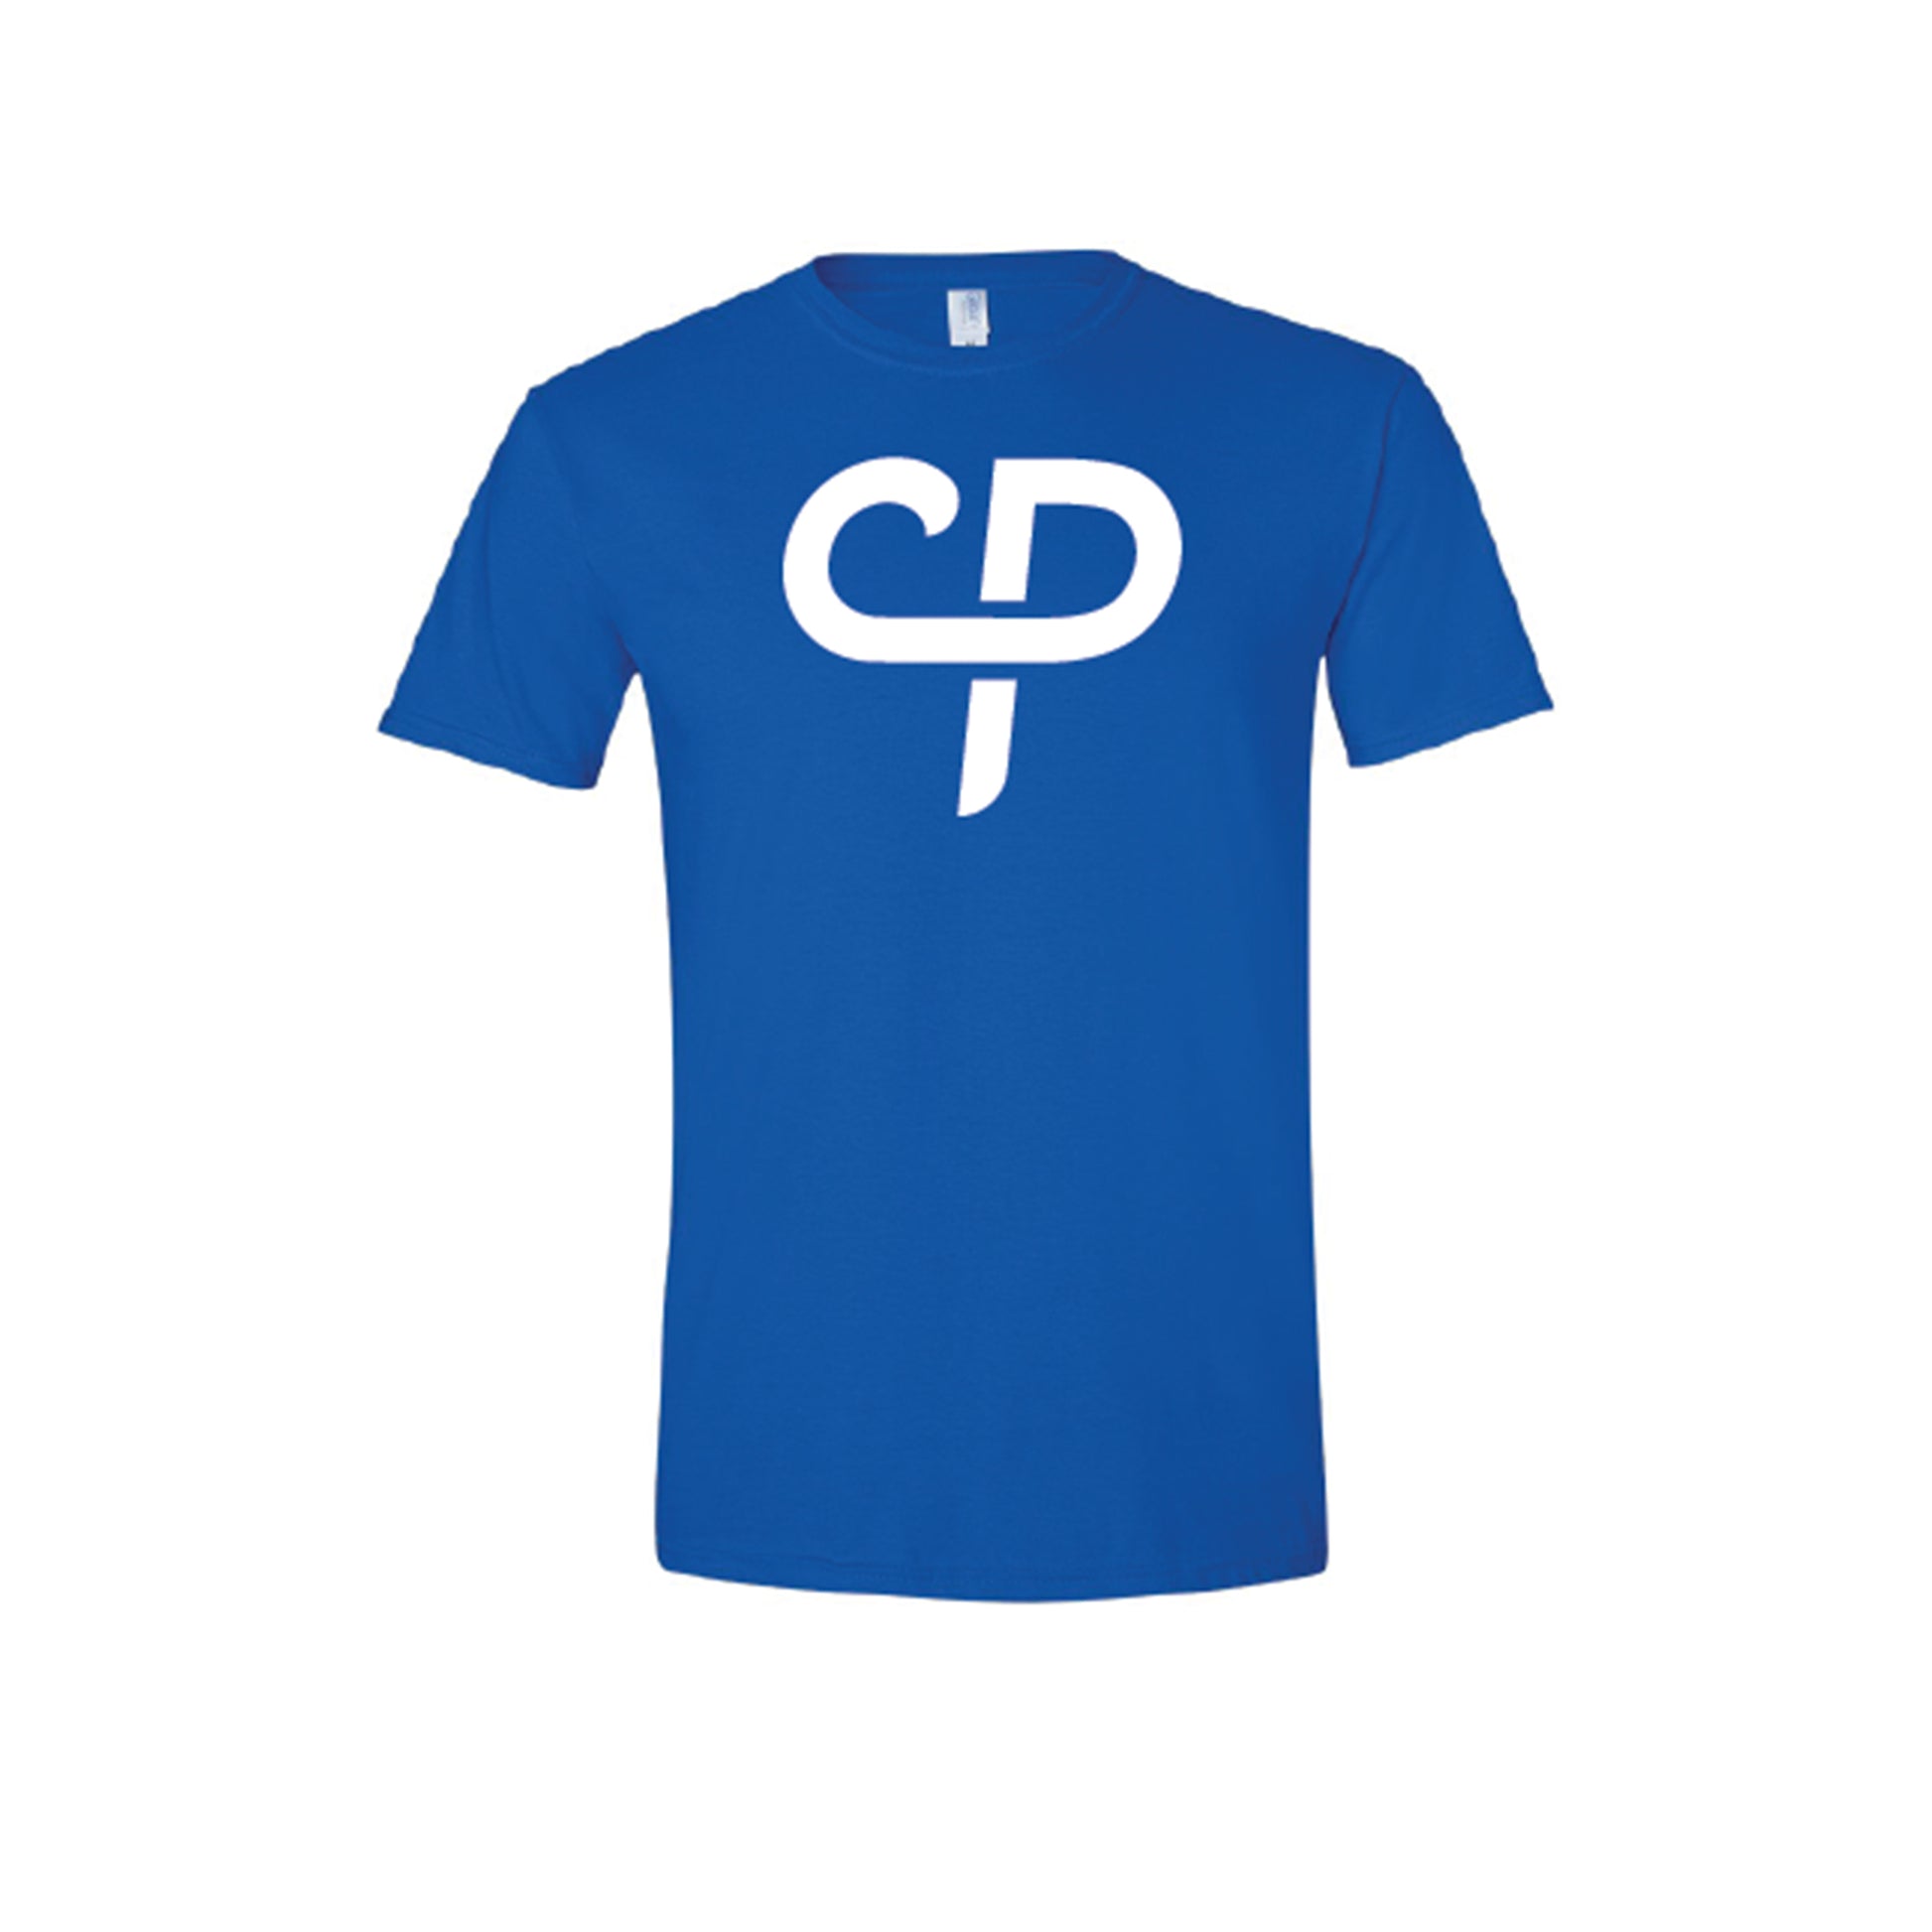 Royal blue short sleeve youth child pickleball athletic shirt with white CP Parenteau logo on front